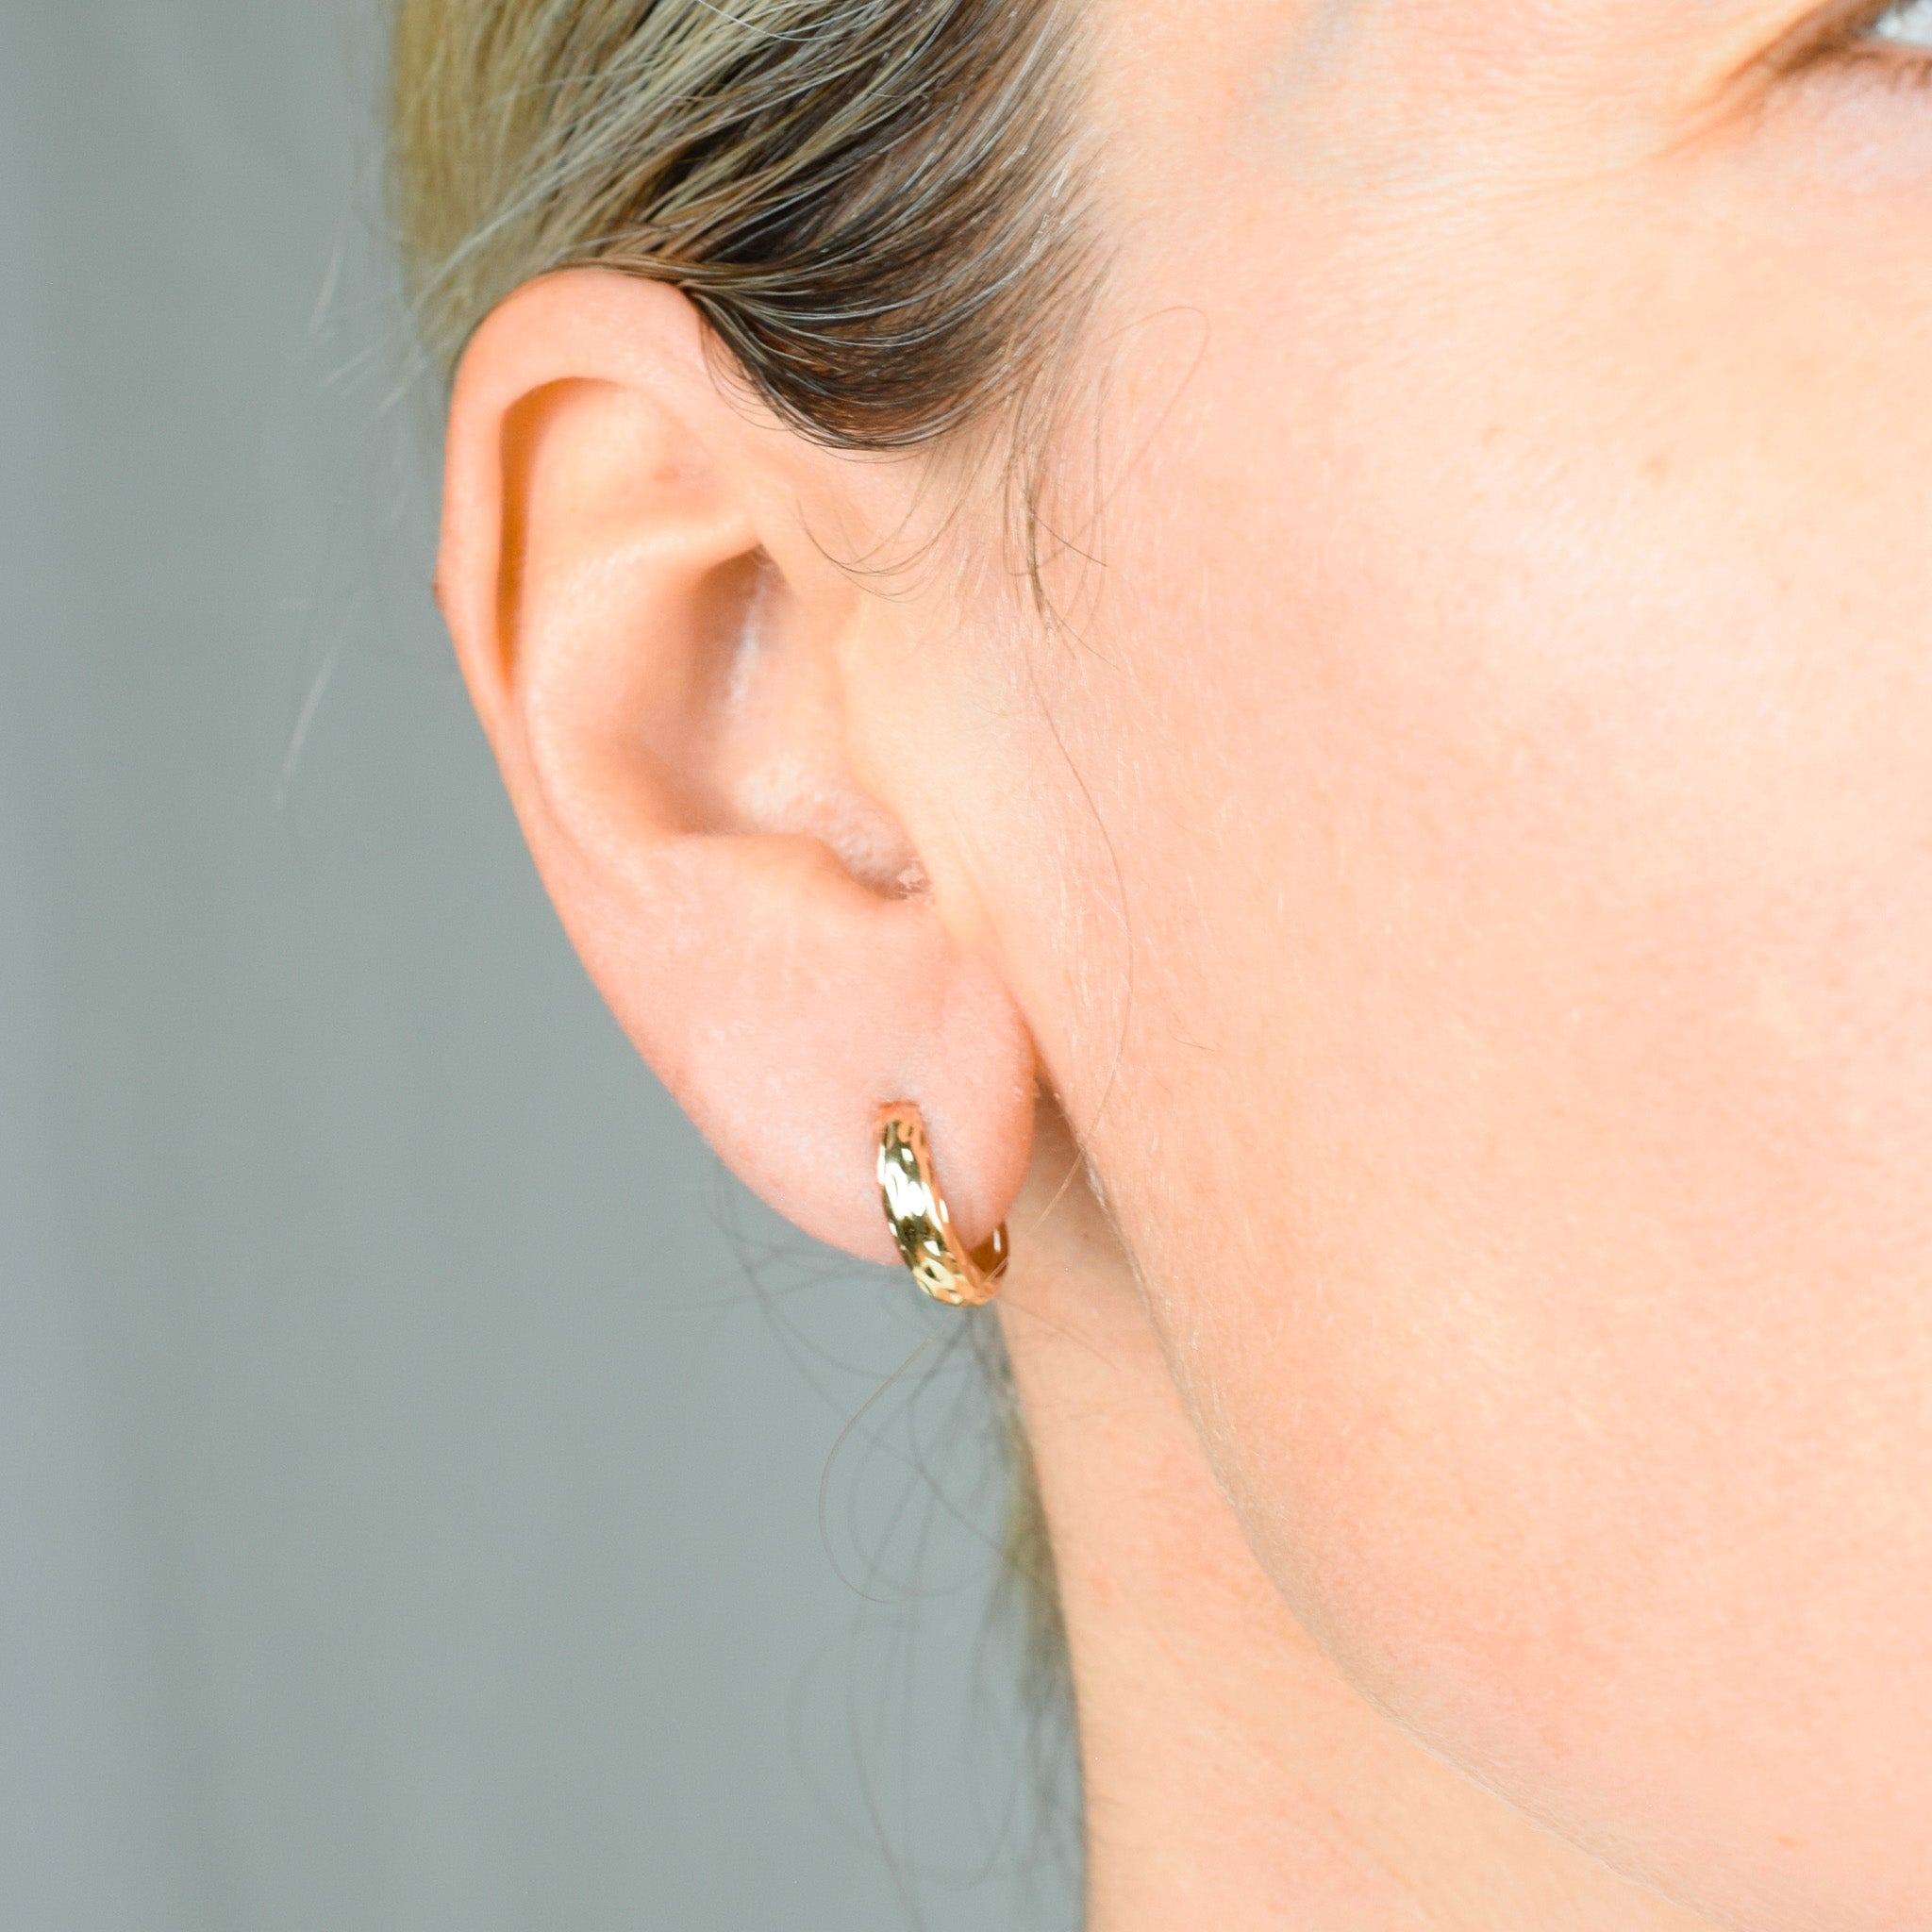 12.6 mm Etched Gold Half Hoops